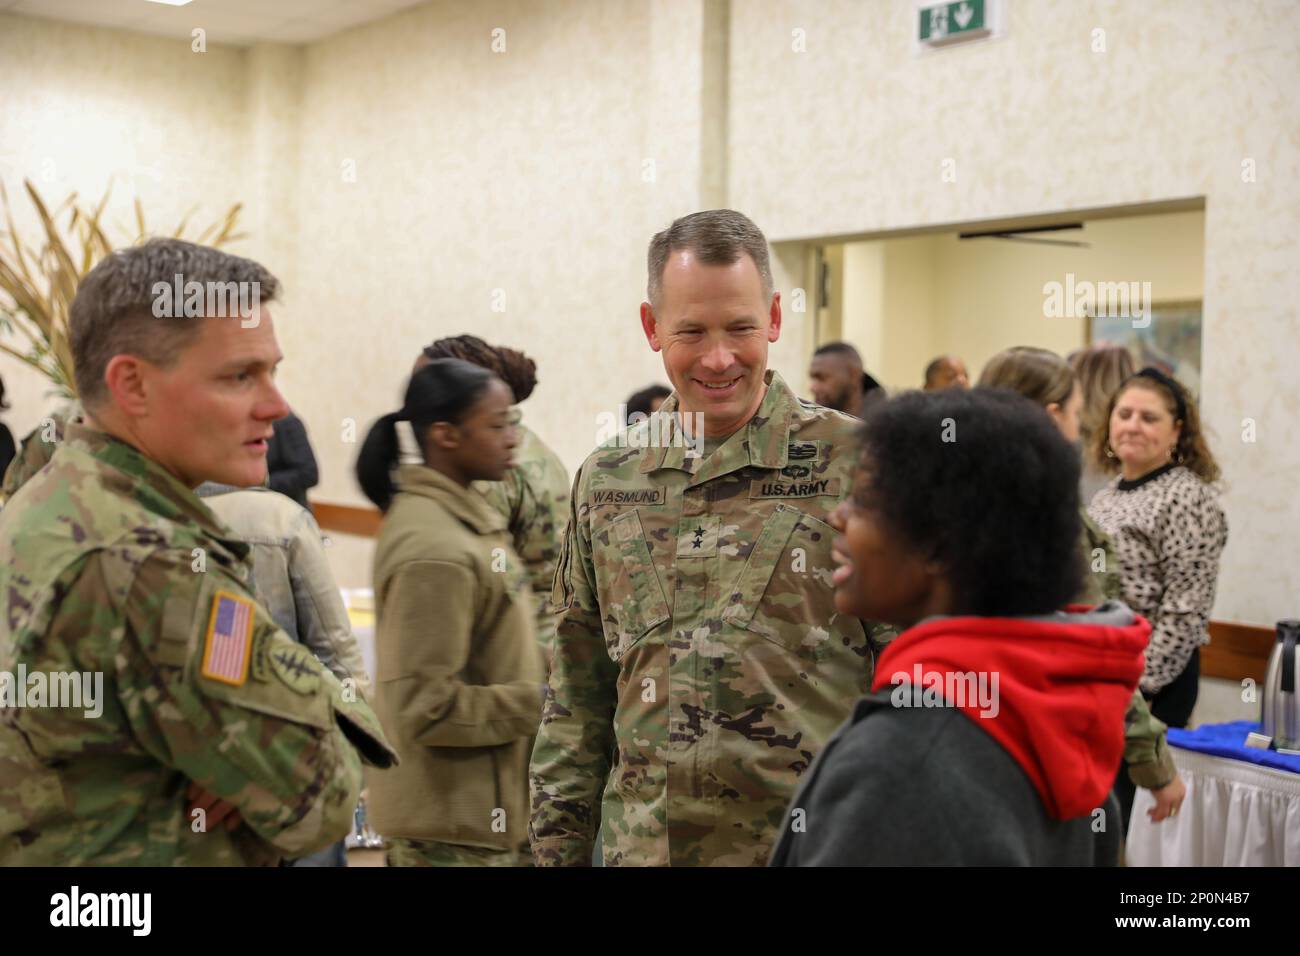 Maj. Gen. Todd Wasmund and Col. Matthew Gomlak speak with a Vicenza Community Member prior to the commencement of the Dr. Martin Luther King, Jr. prayer breakfast. The event was an opportunity for Soldiers and civilians to reflect on past injustices King fought during the civil rights movement and highlight diversity in today's Army. Stock Photo